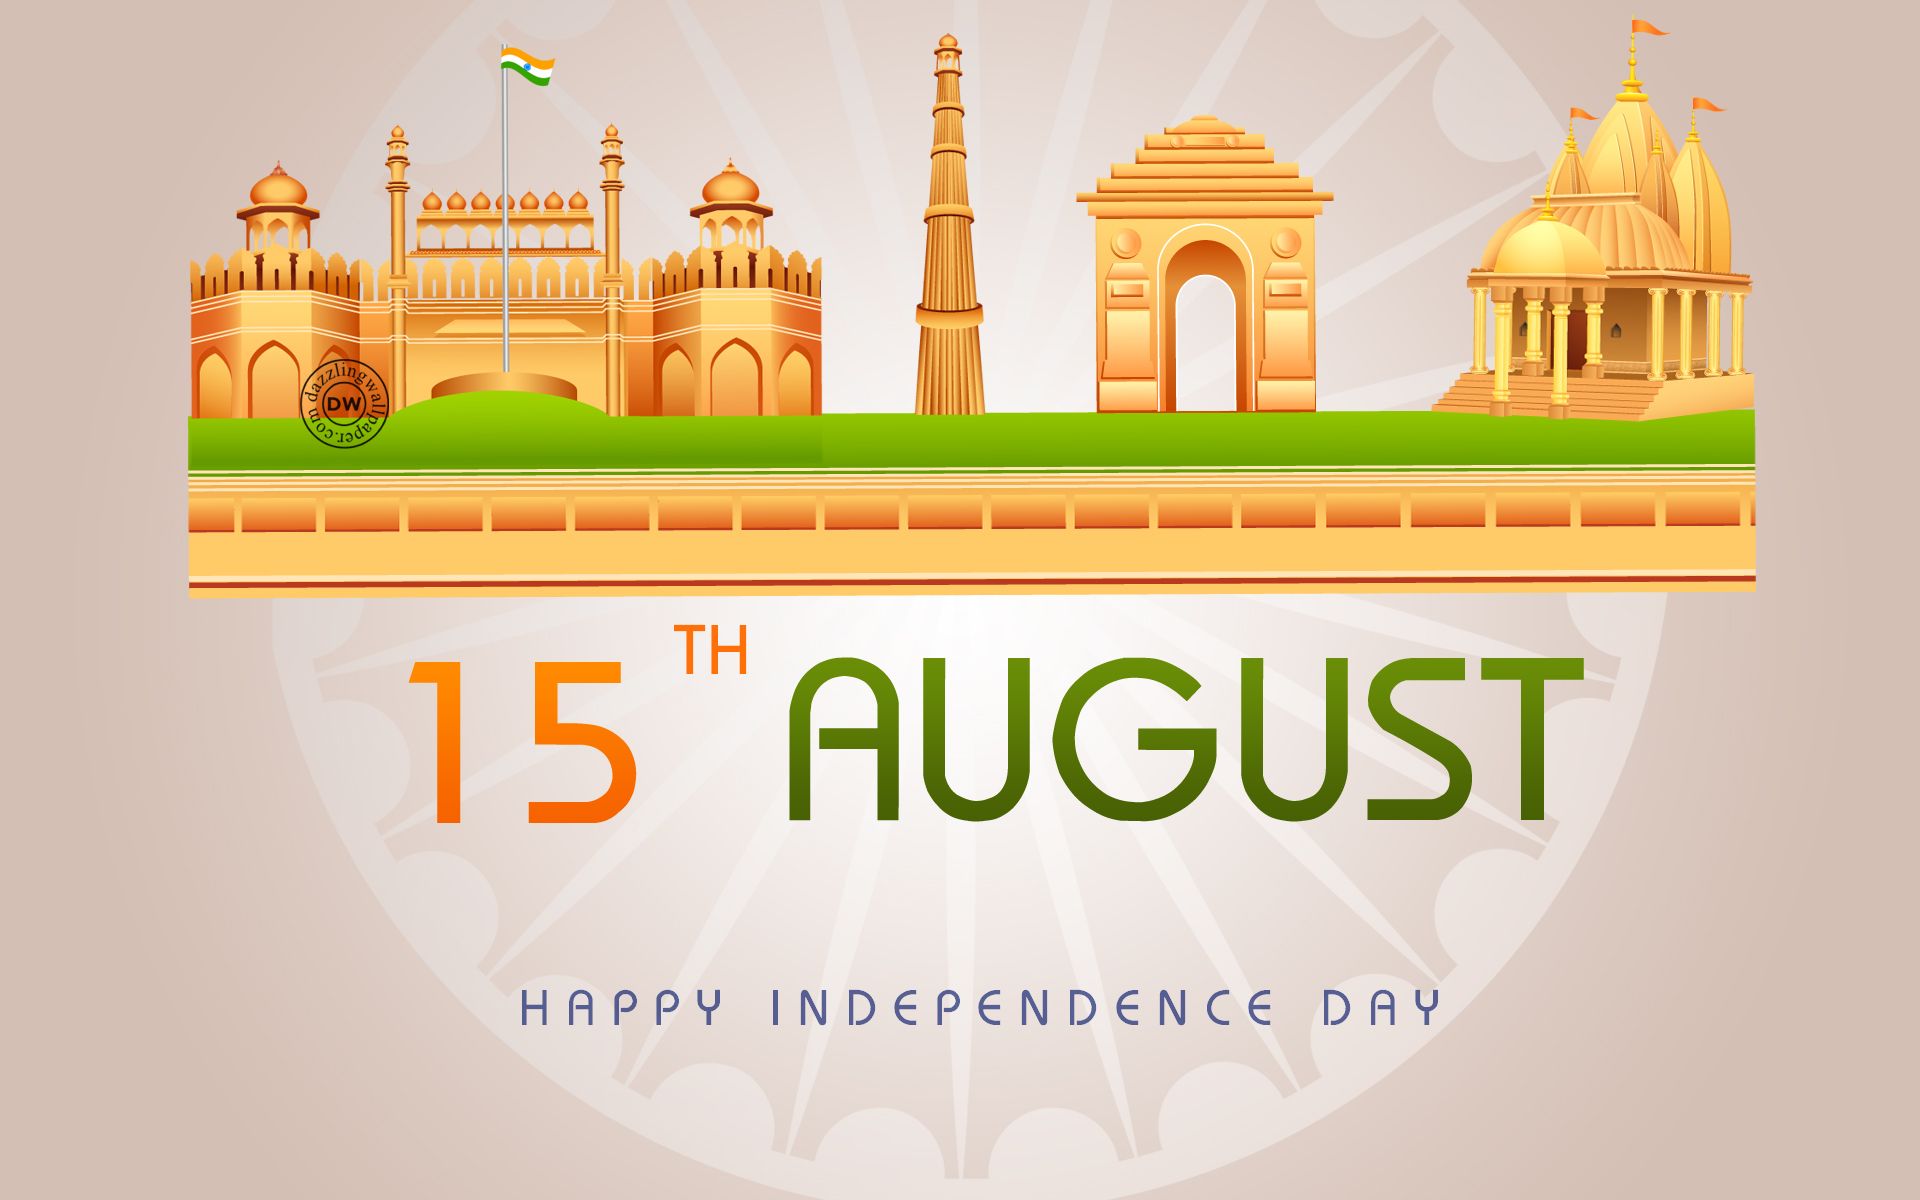 Happy Independence Day India 2018 - HD Wallpaper 